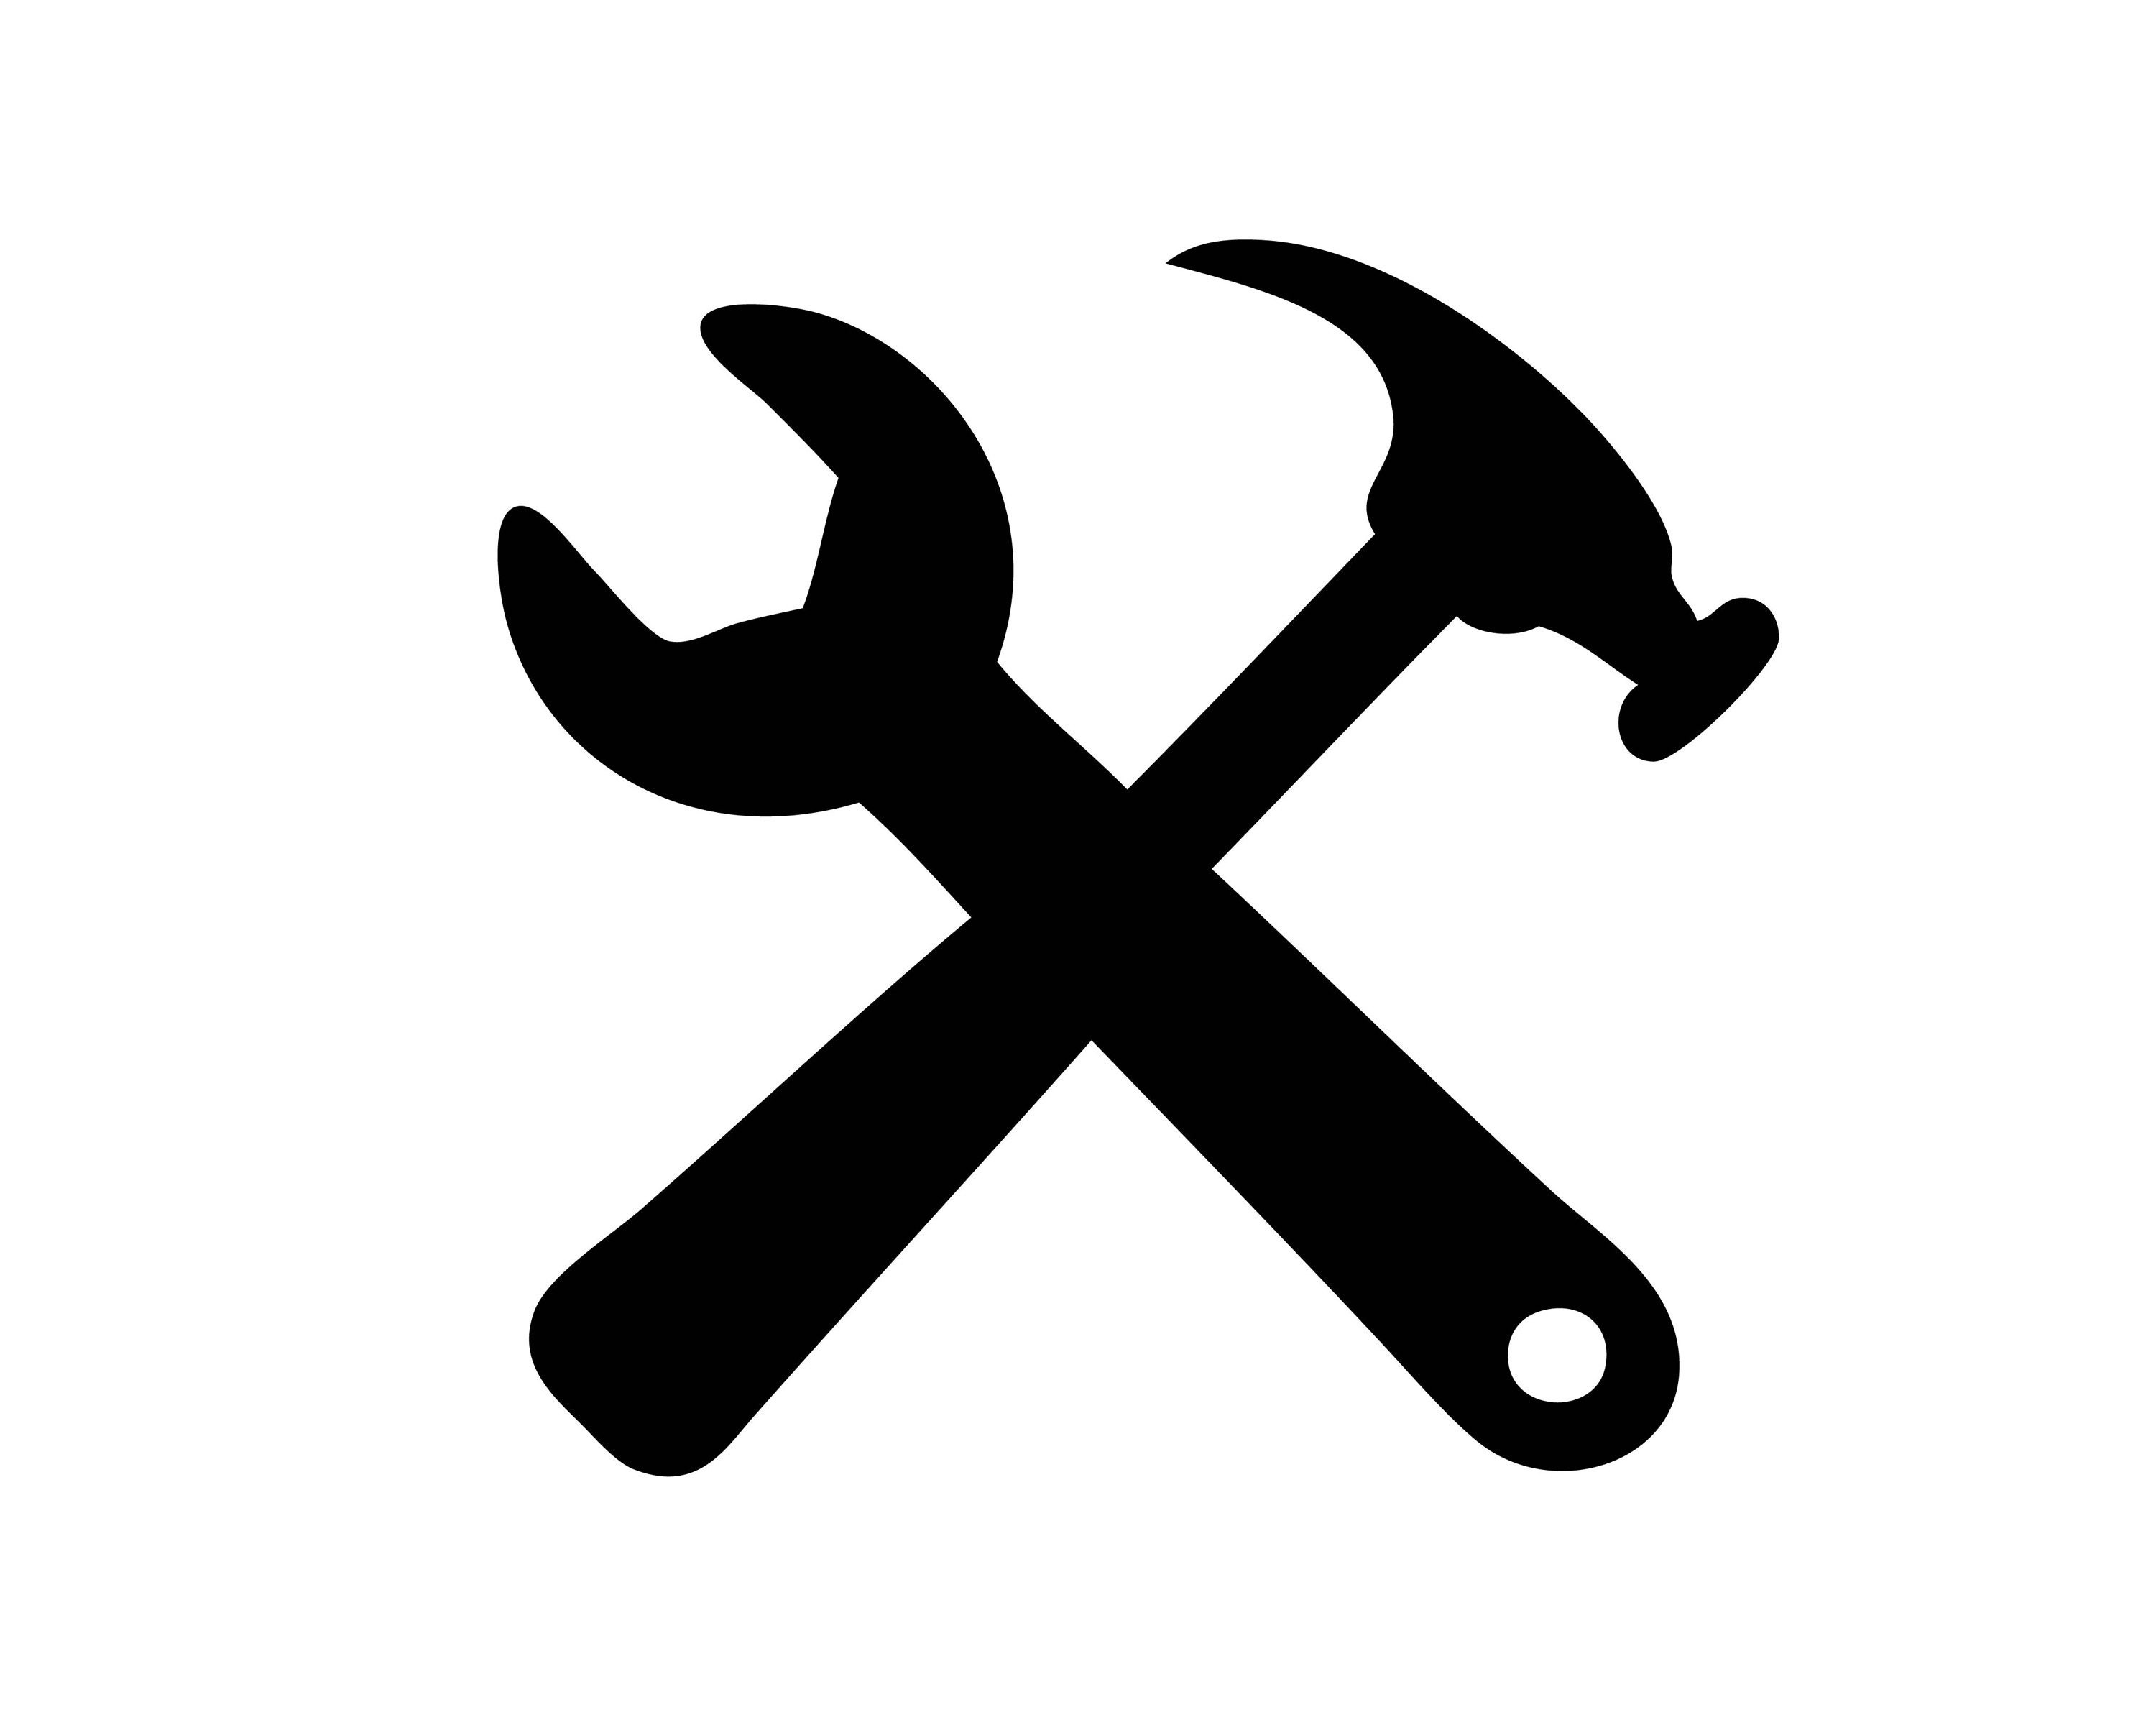 Wrench and Hammer Crossed Cross Tools Logo Sign Handyman - Etsy